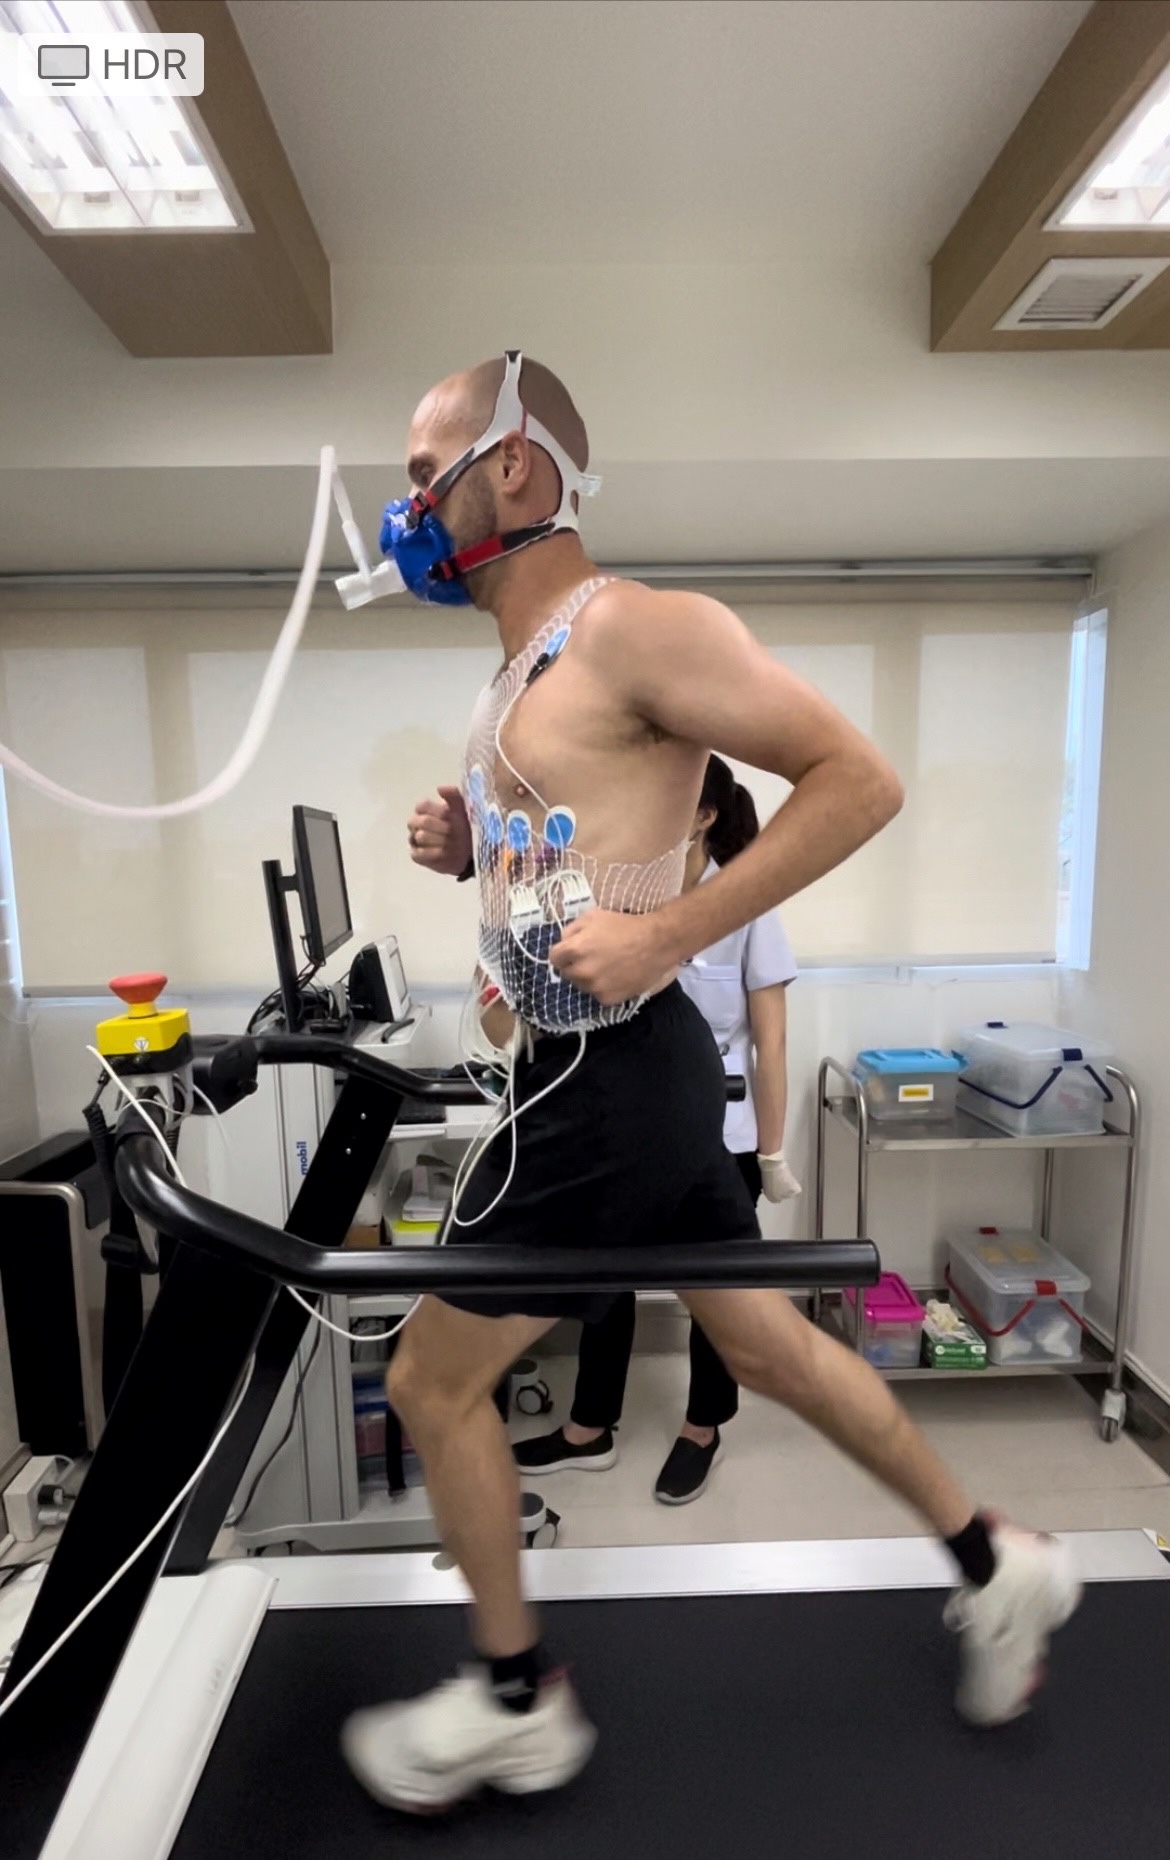 A shirtless man runs on a treadmill with a mask over his face and wires attached to his body from a machine